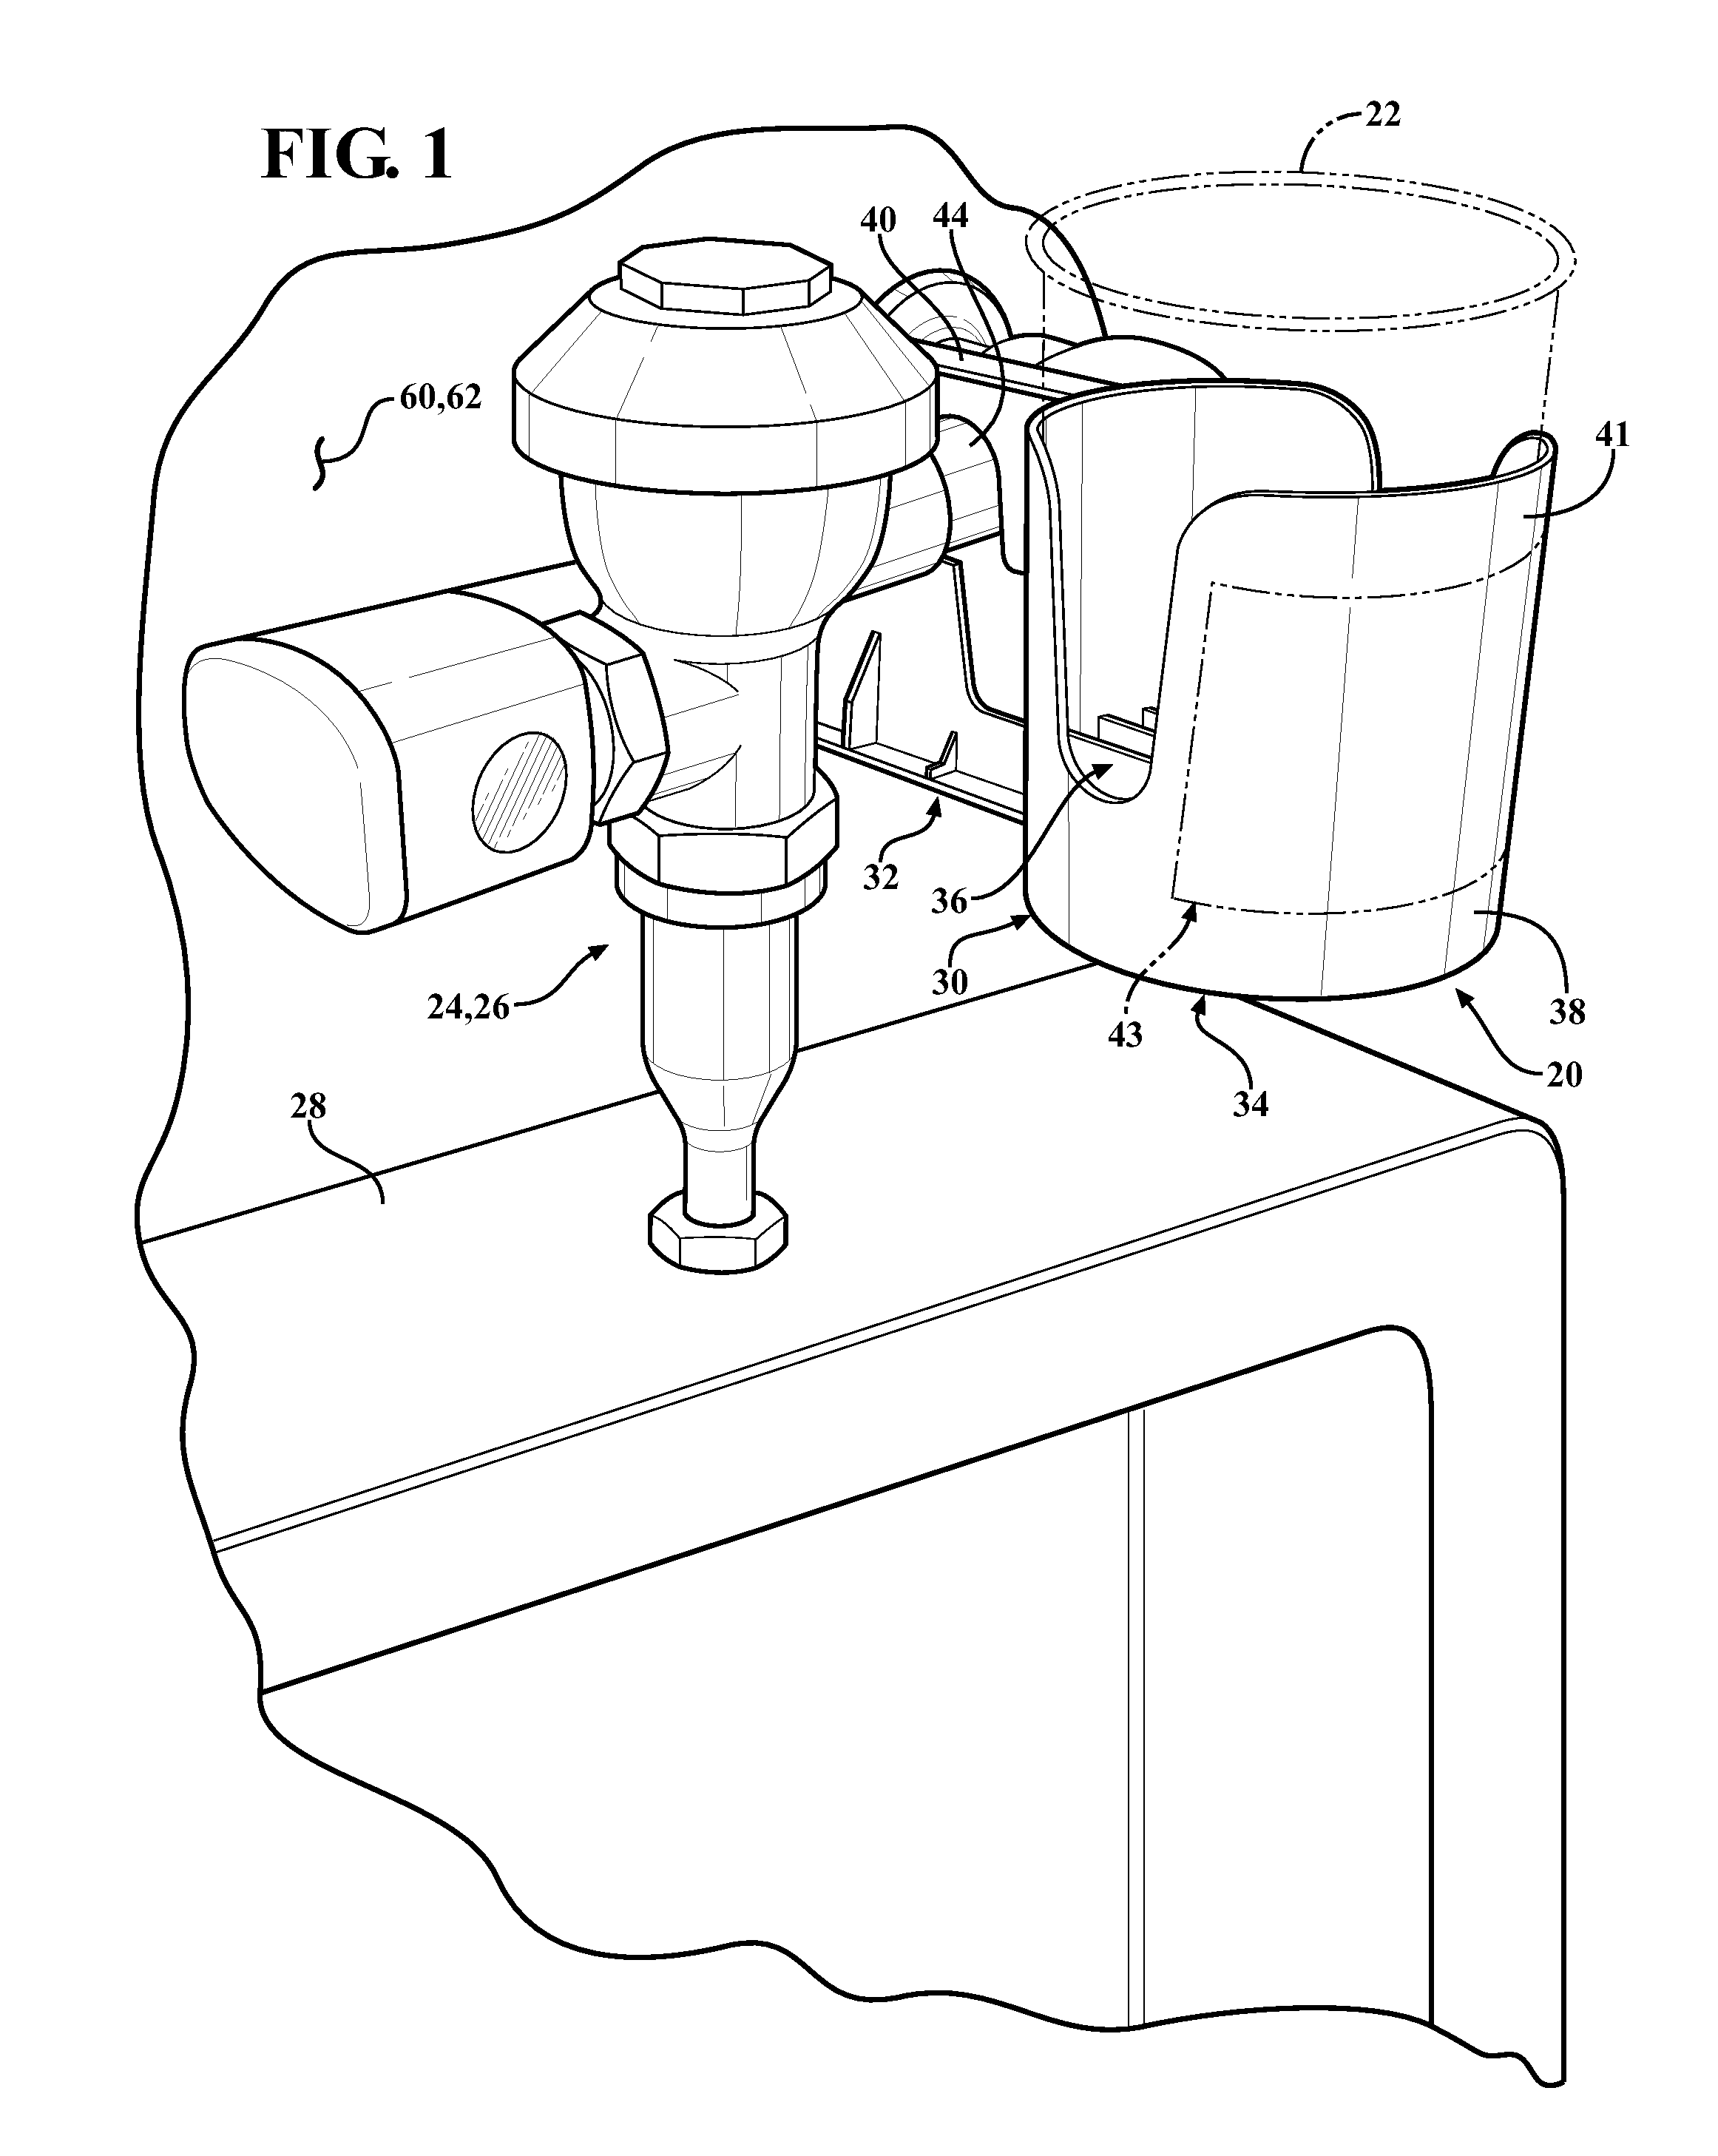 Beverage container receptacle and method of installing the same